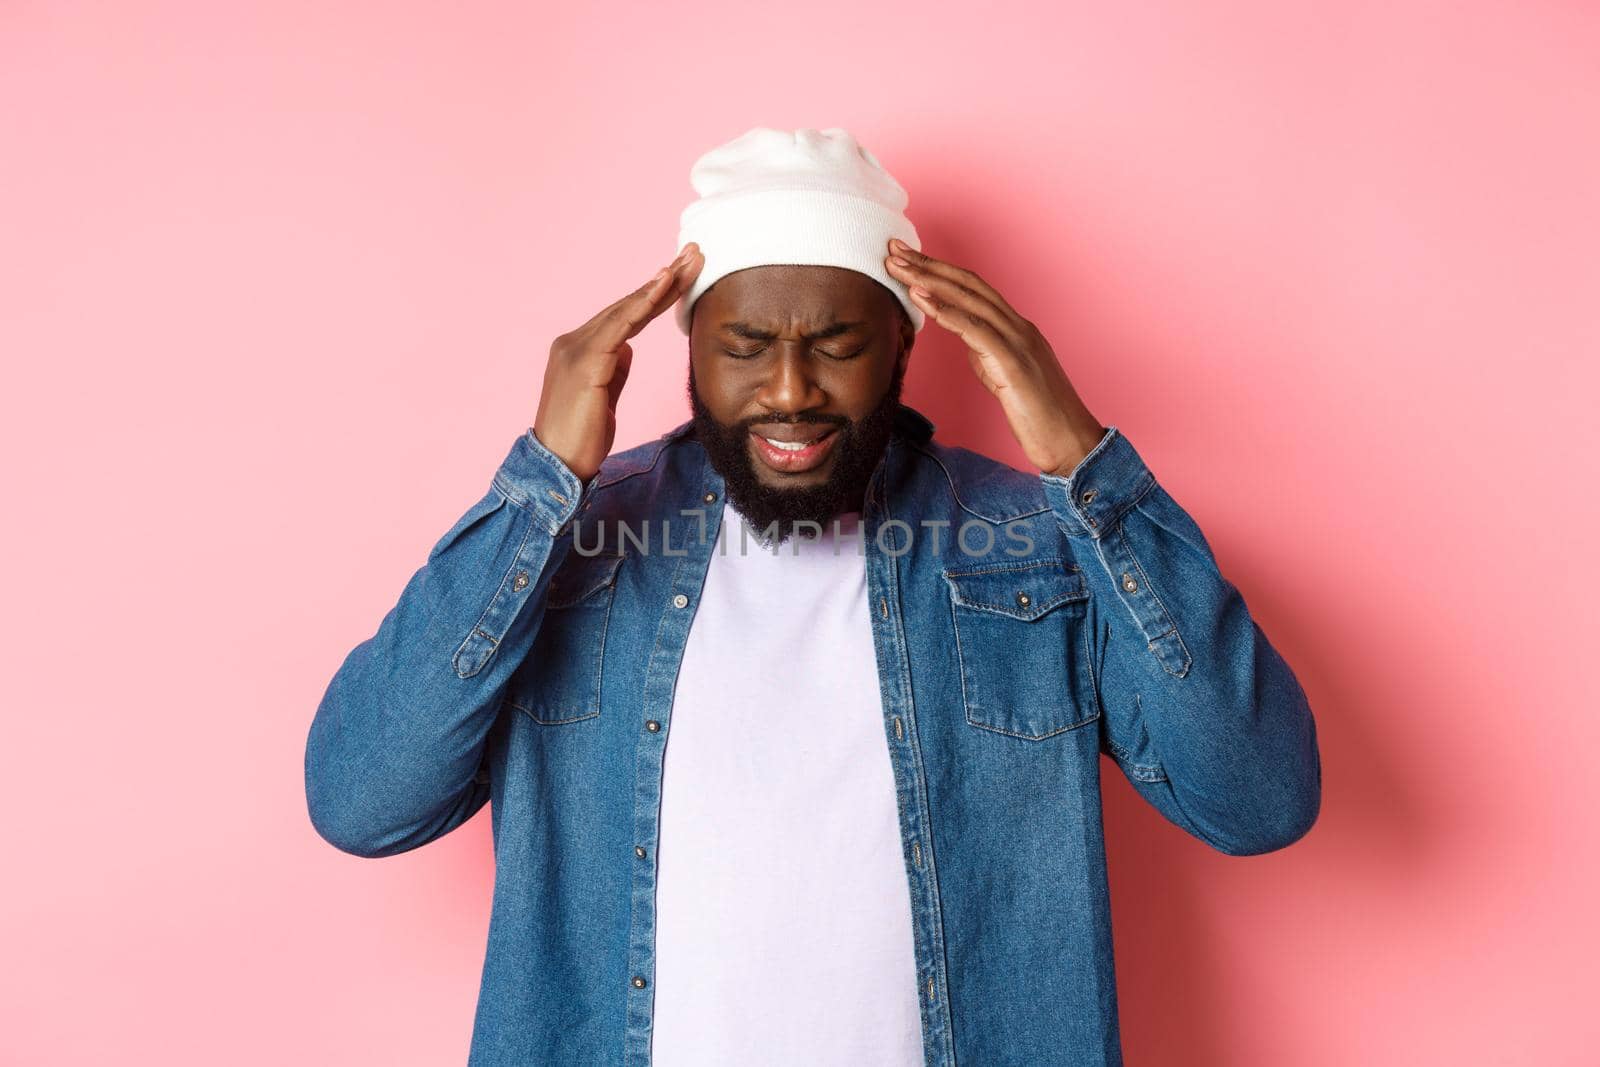 Distressed Black man having headache, touching head and grimacing with concerned face, standing over pink background.